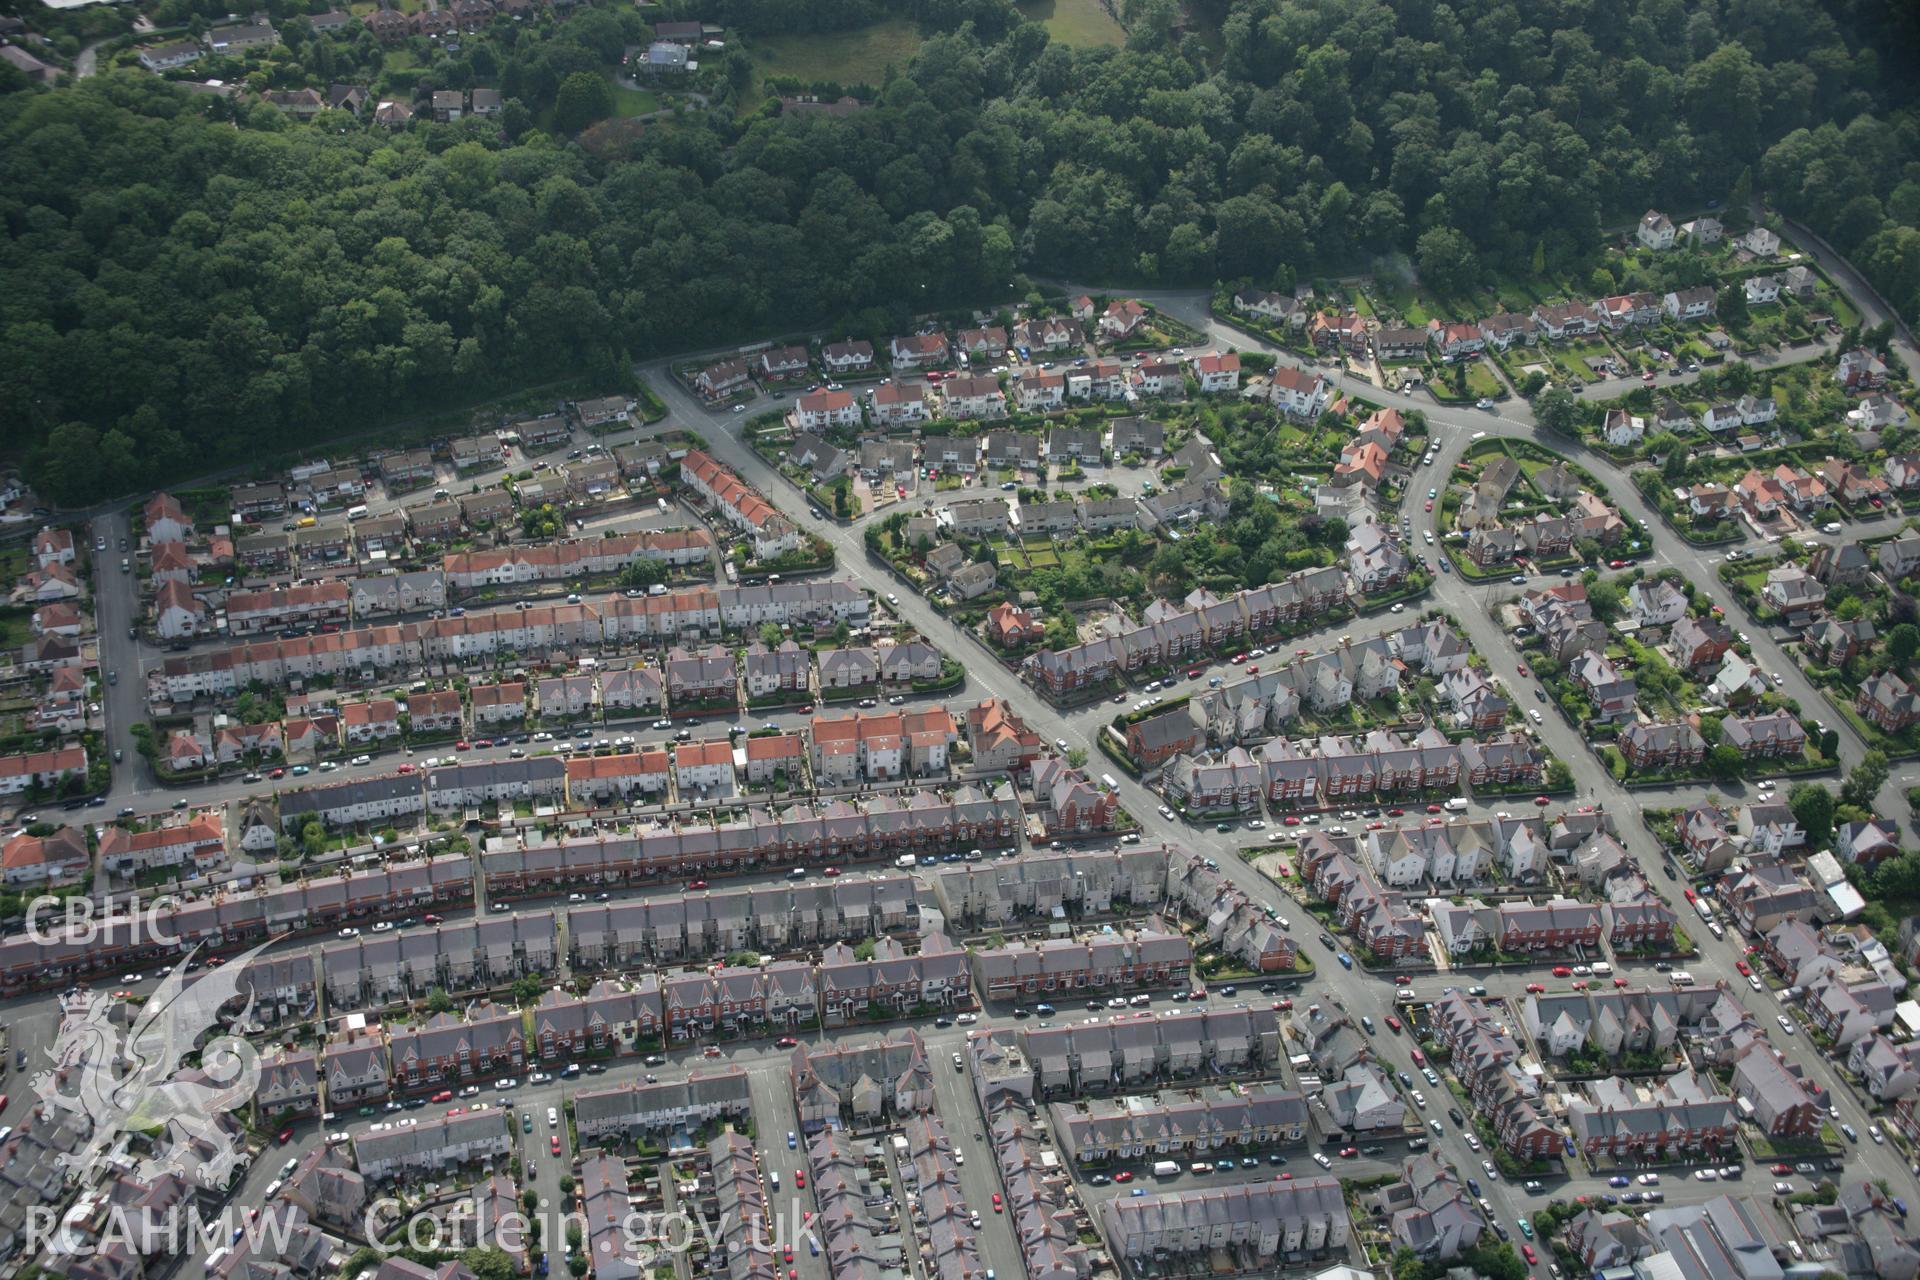 RCAHMW colour oblique aerial photograph of housing in Colwyn Bay. Taken on 14 August 2006 by Toby Driver.